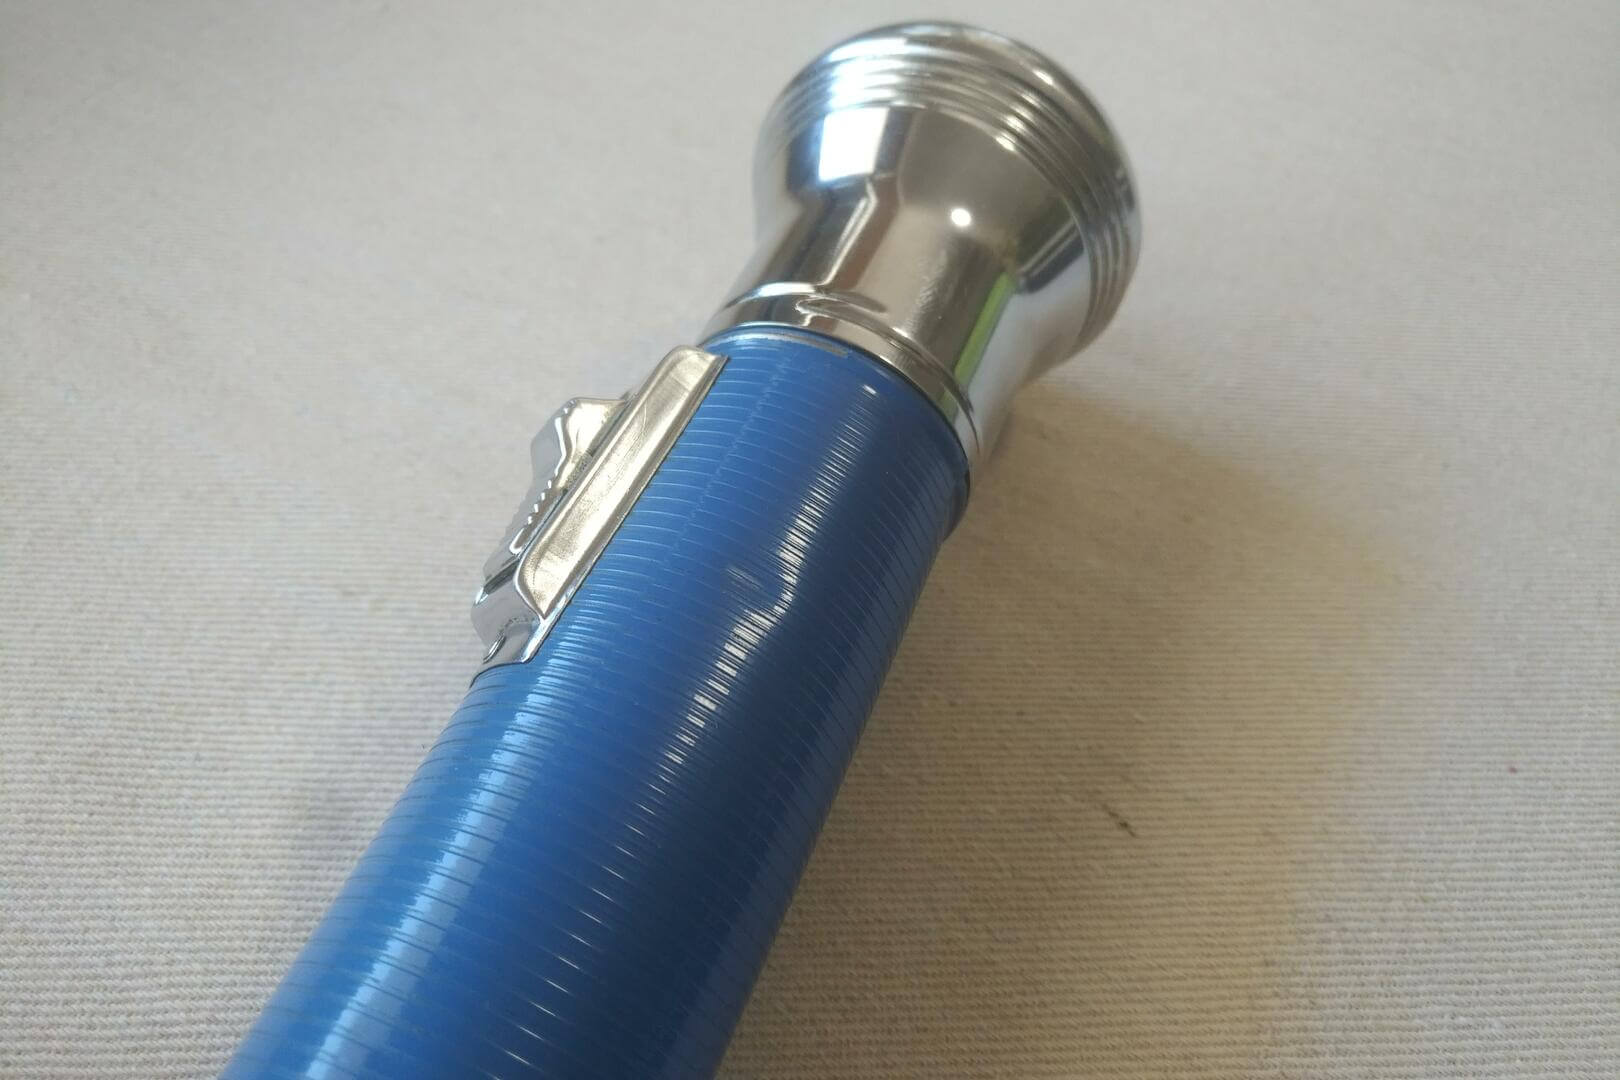 Vintage Panasonic emergency flashlight in chrome and blue. 1970s retro made in Japan collectible lightning and household tools